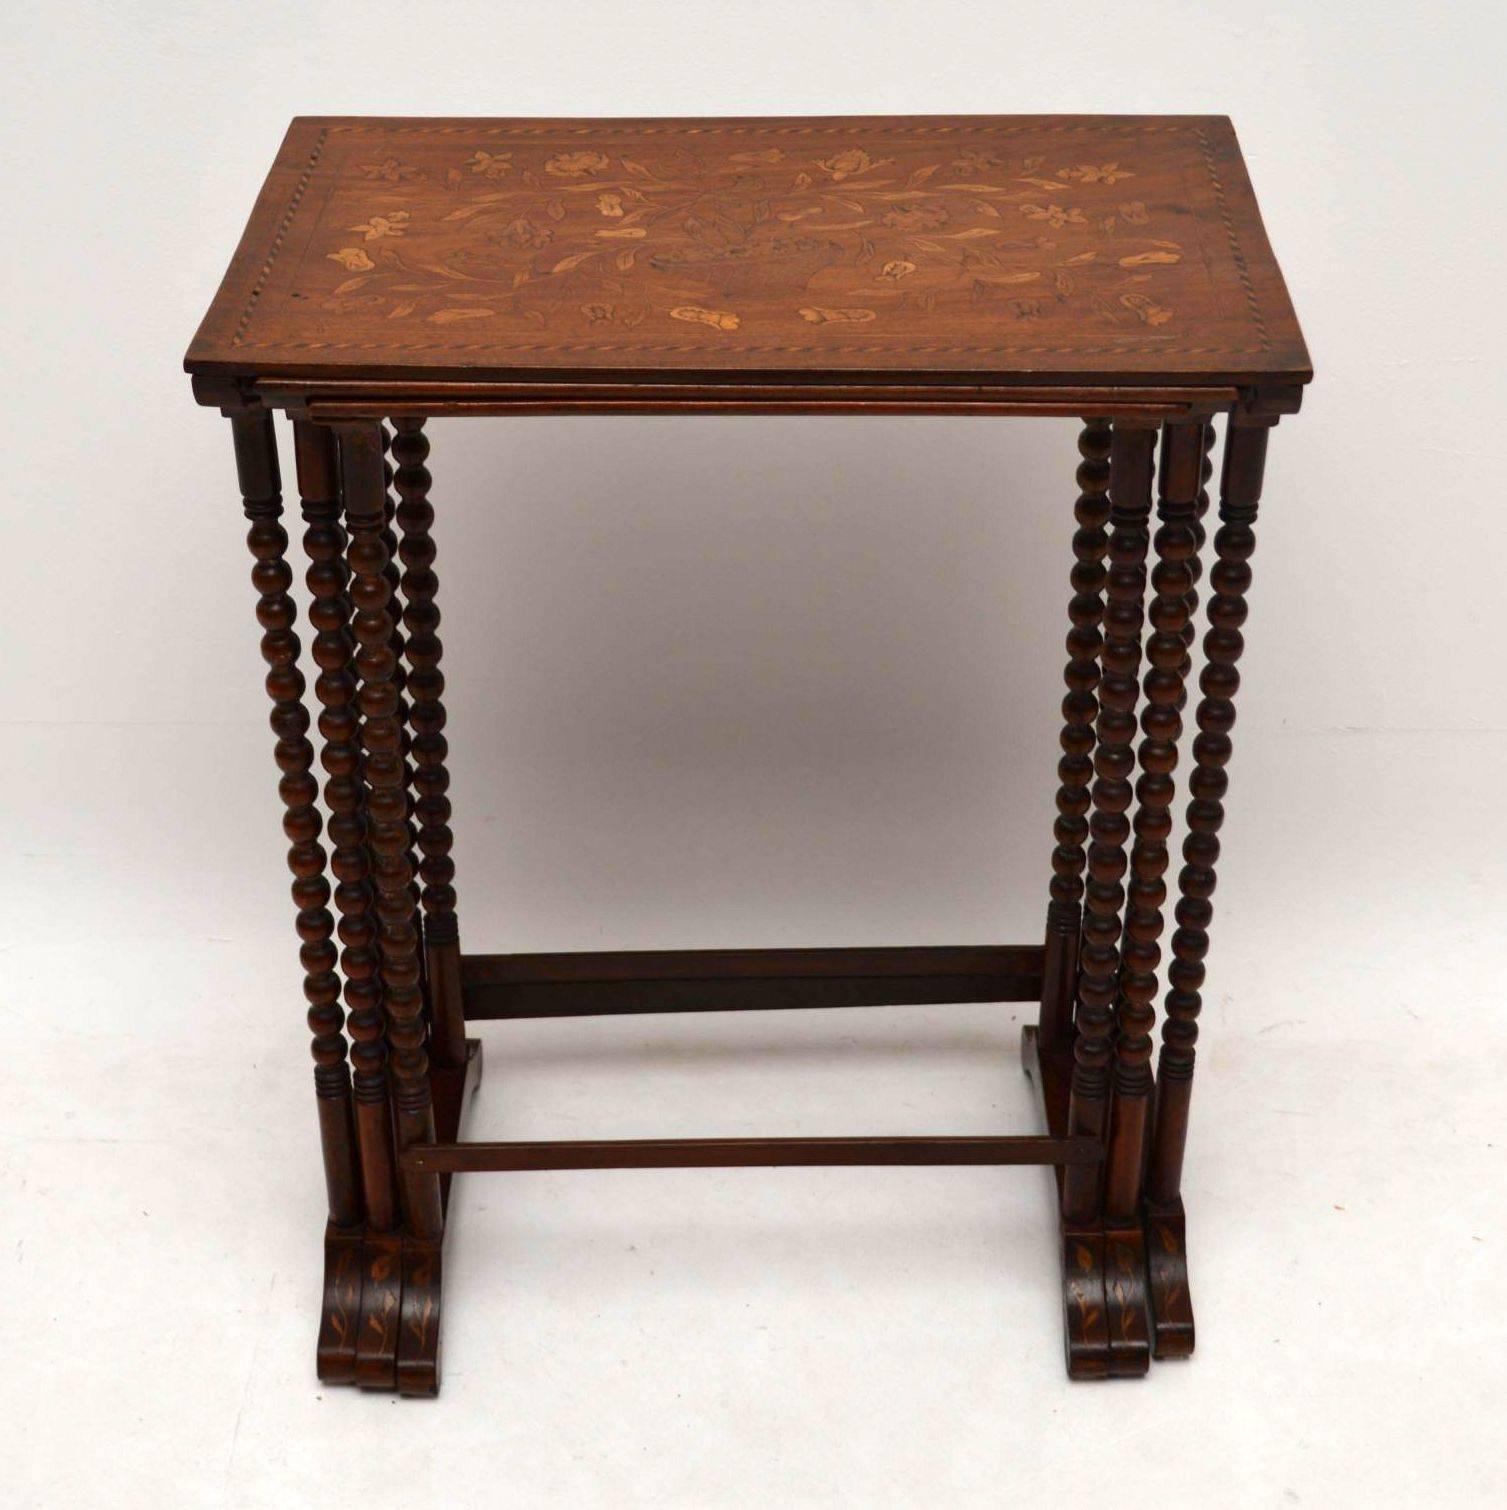 Rare antique nest of Dutch Marquetry tables in exceptionally good original condition, dating from circa 1840s-1860s period. They are mahogany, with the marquetry all-over the tops, sides and even on the feet. The tables are structurally sound, with